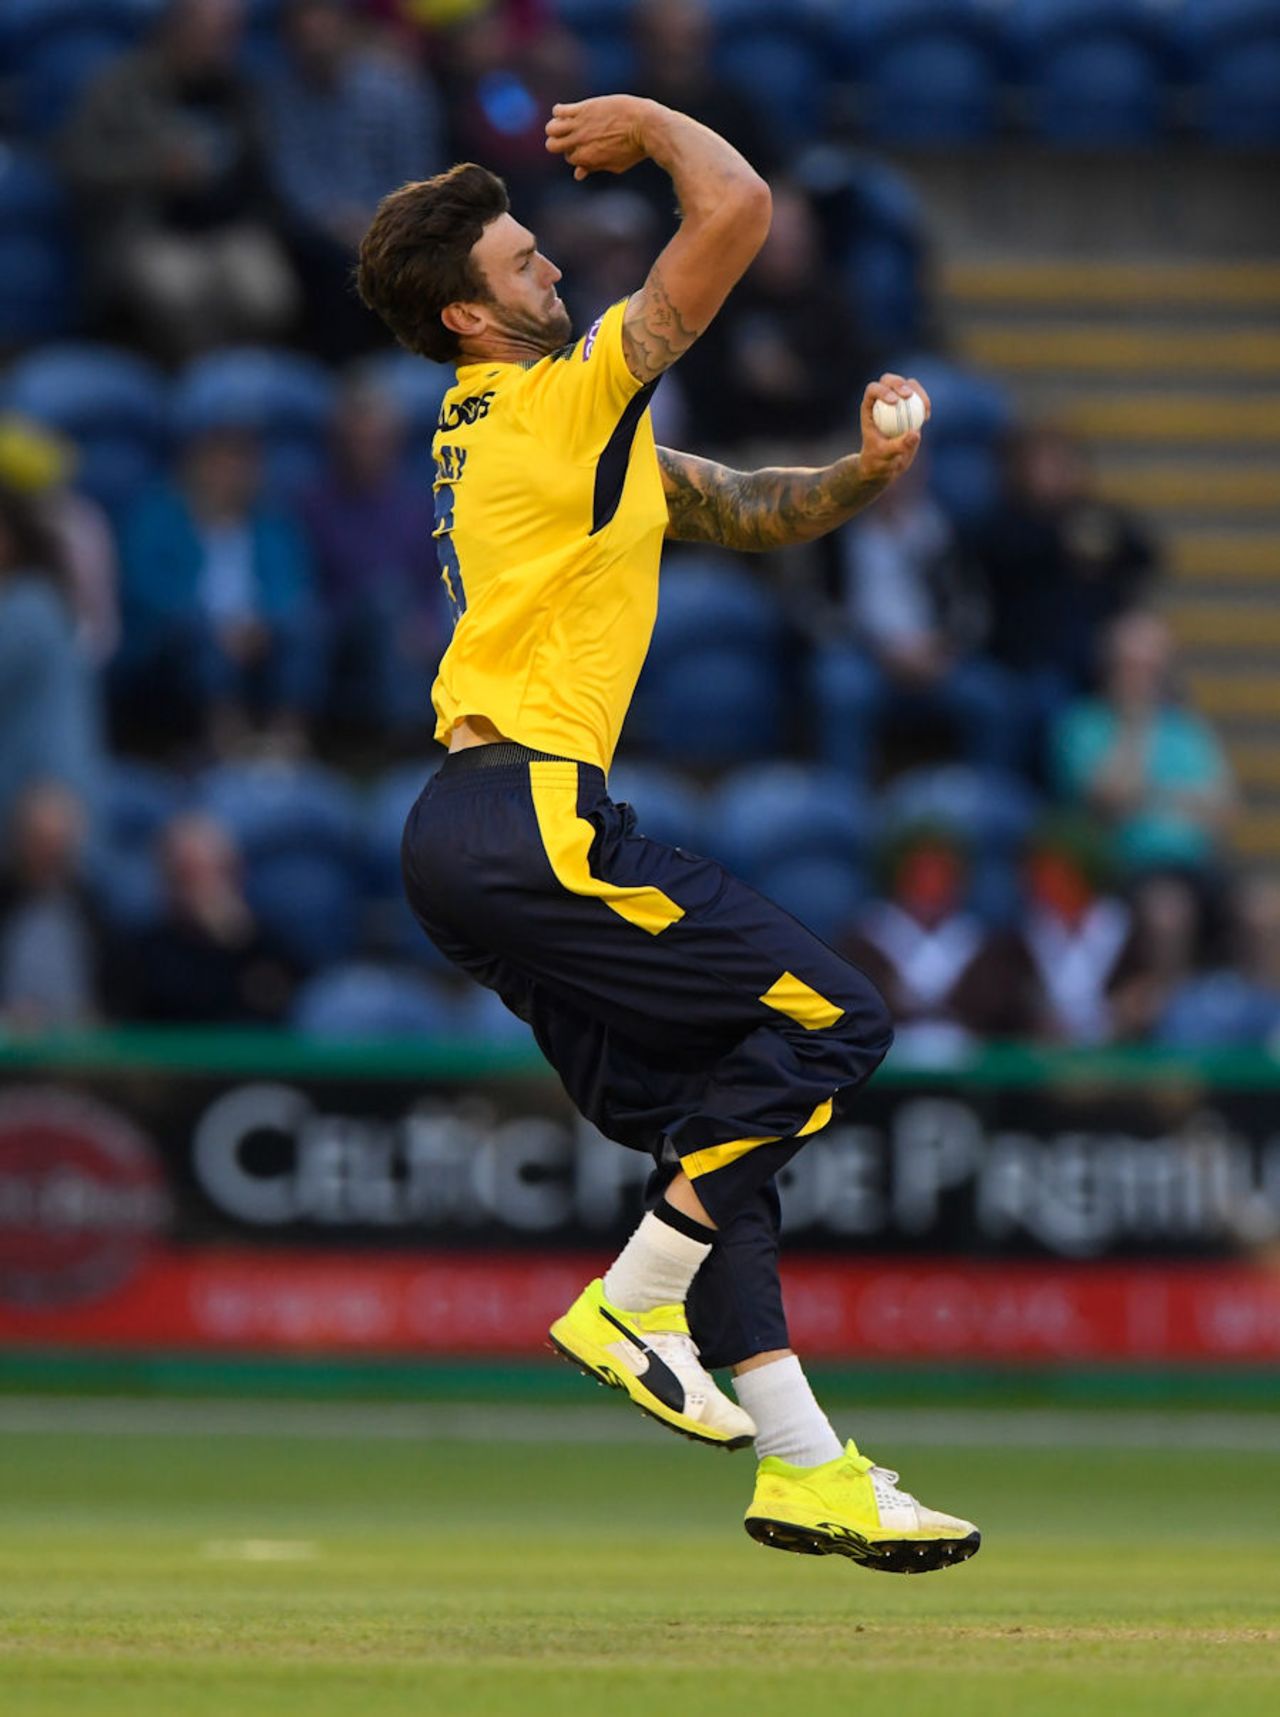 Reece Topley in action for Hampshire, Glamorgan v Hampshire, NatWest T20 Blast, South Group, Cardiff, July 8, 2017